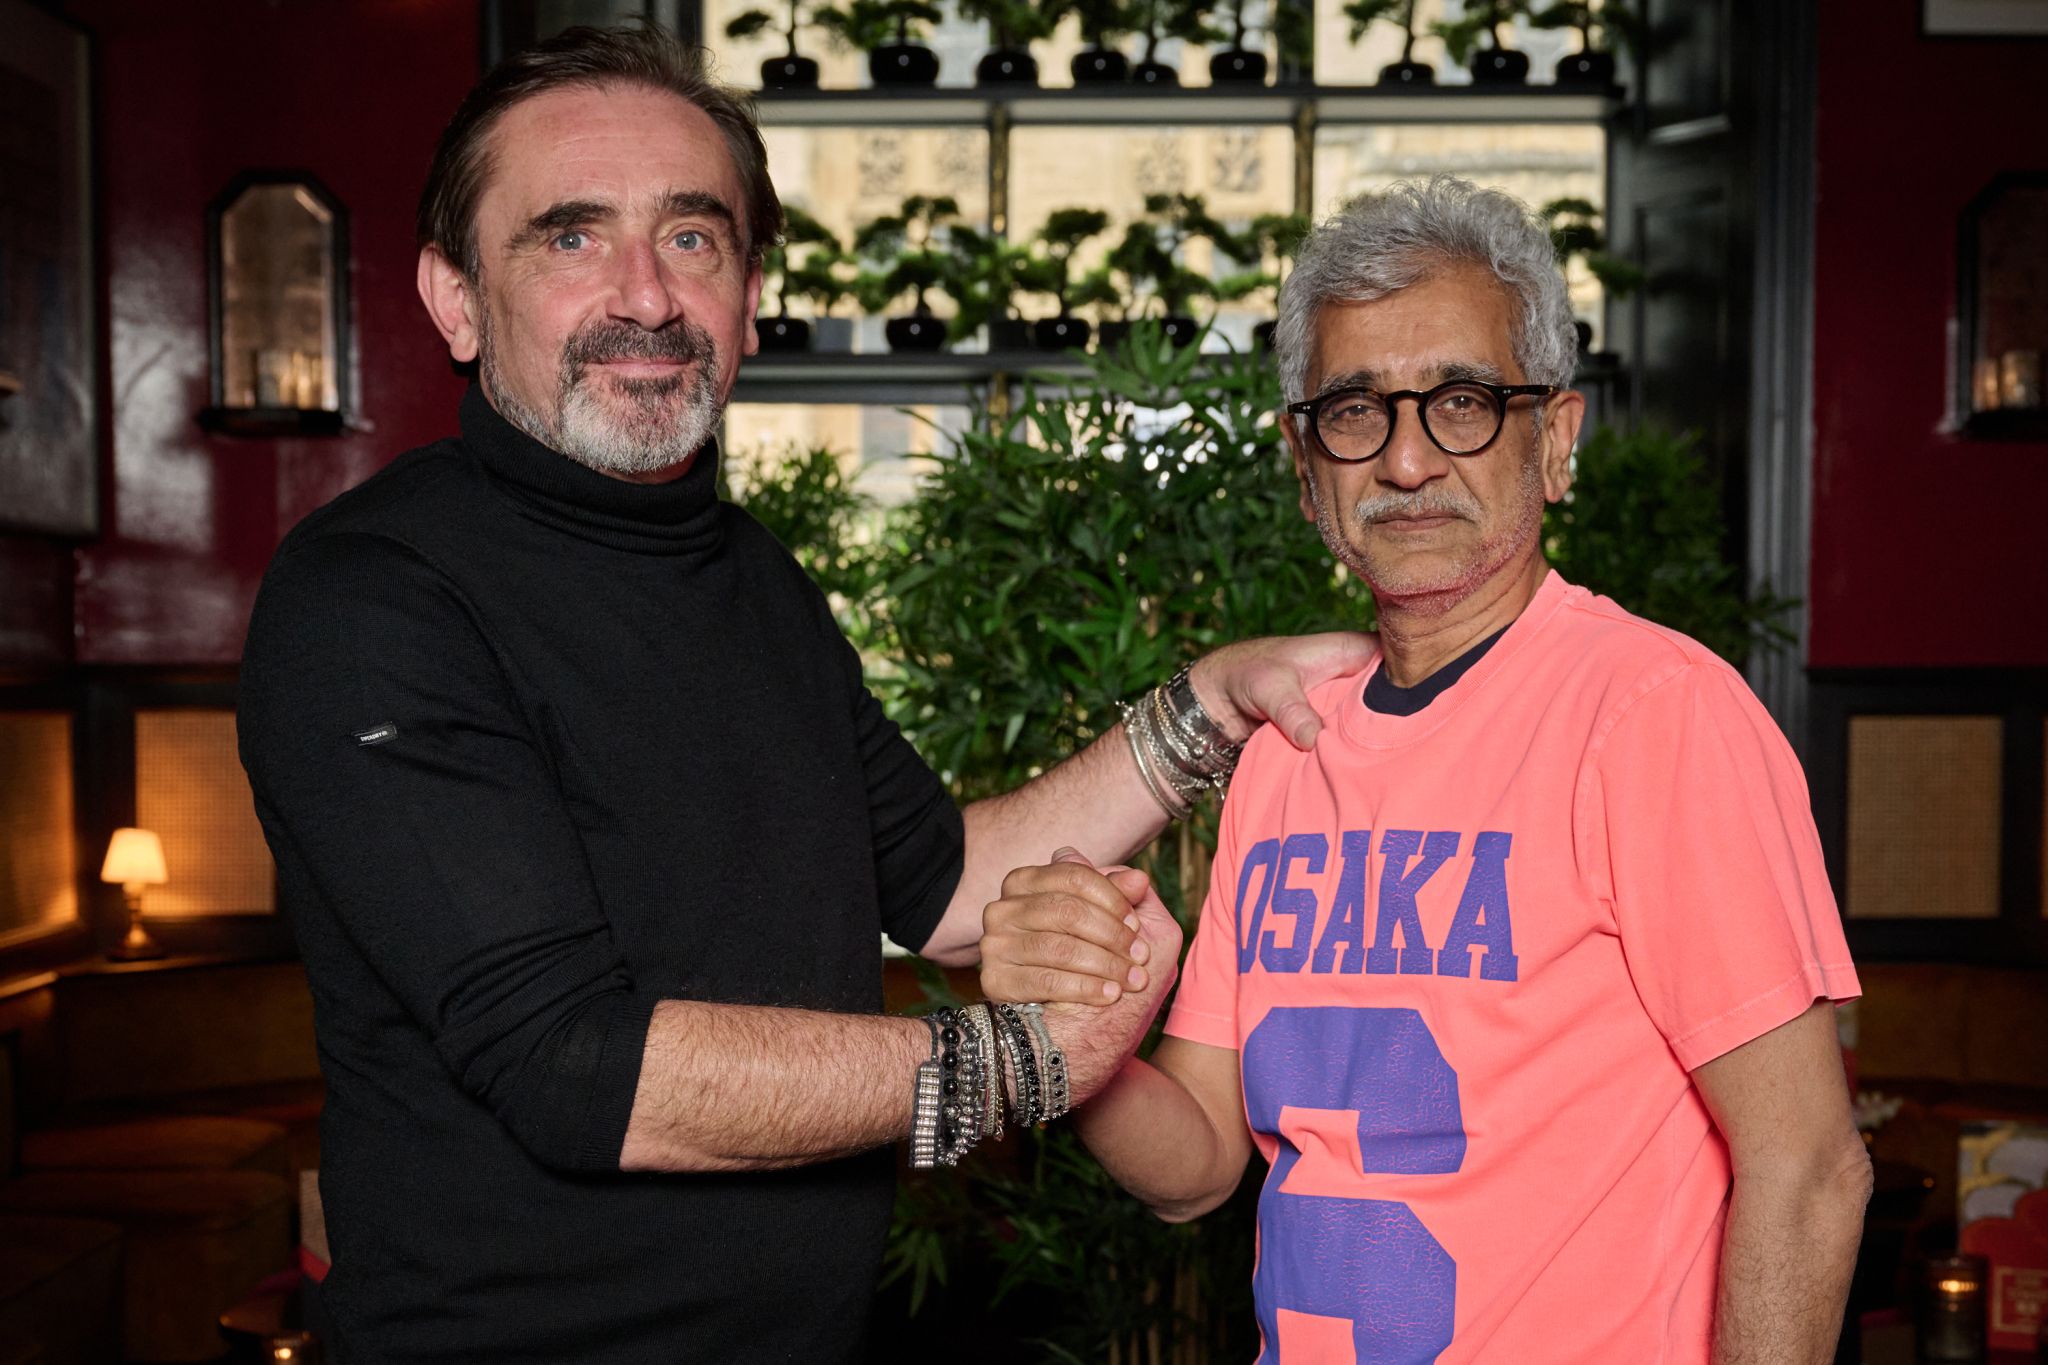 Julian Dunkerton, Superdry’s CEO, and Founder with Darshan Mehta, MD of Reliance Brands Limited